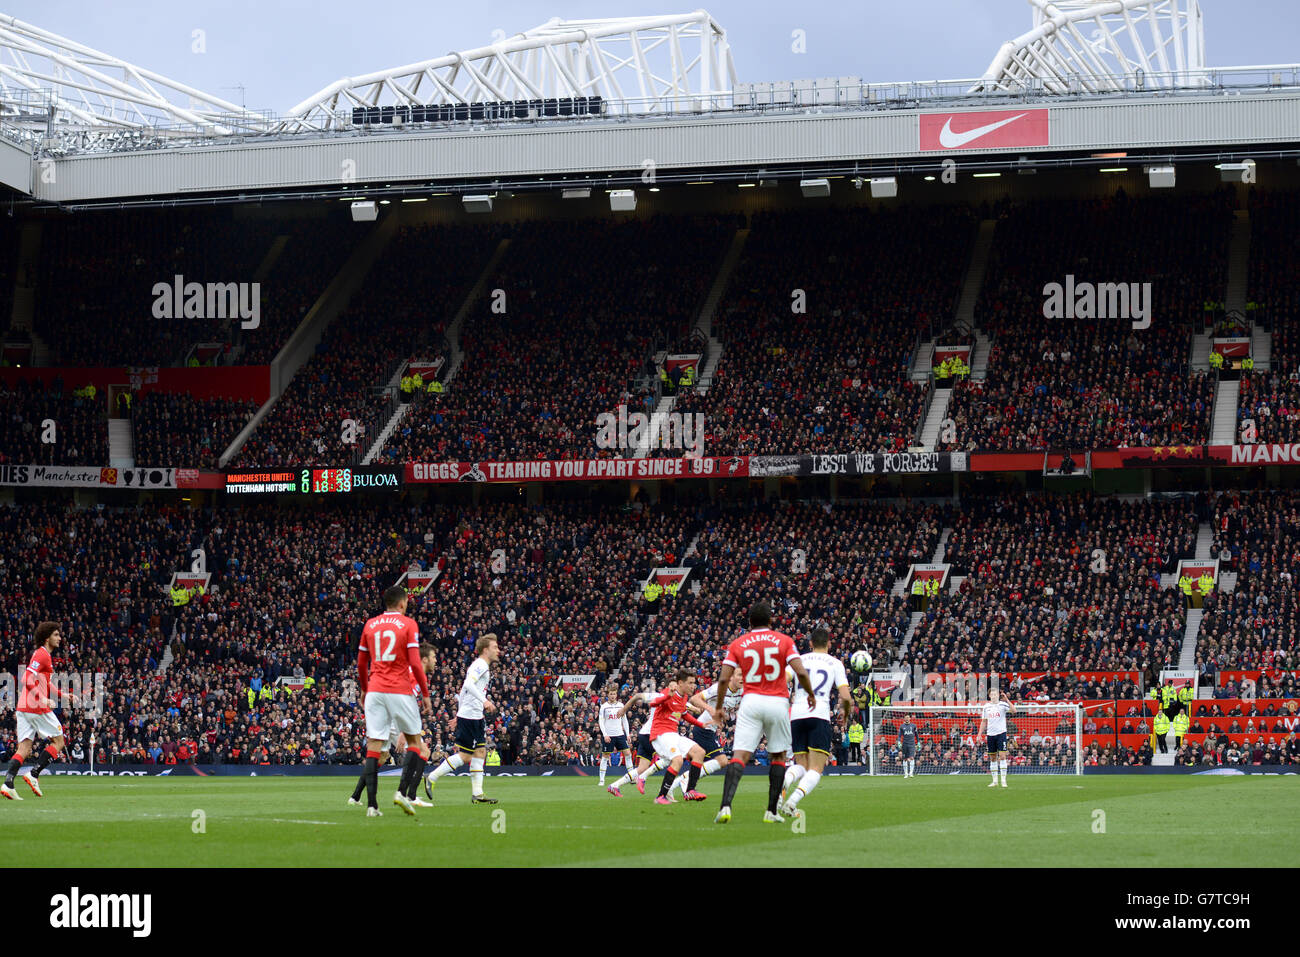 Soccer - Barclays Premier League - Manchester United v Tottenham Hotspur - Old Trafford. General view of the action as fans watch from the stands Stock Photo